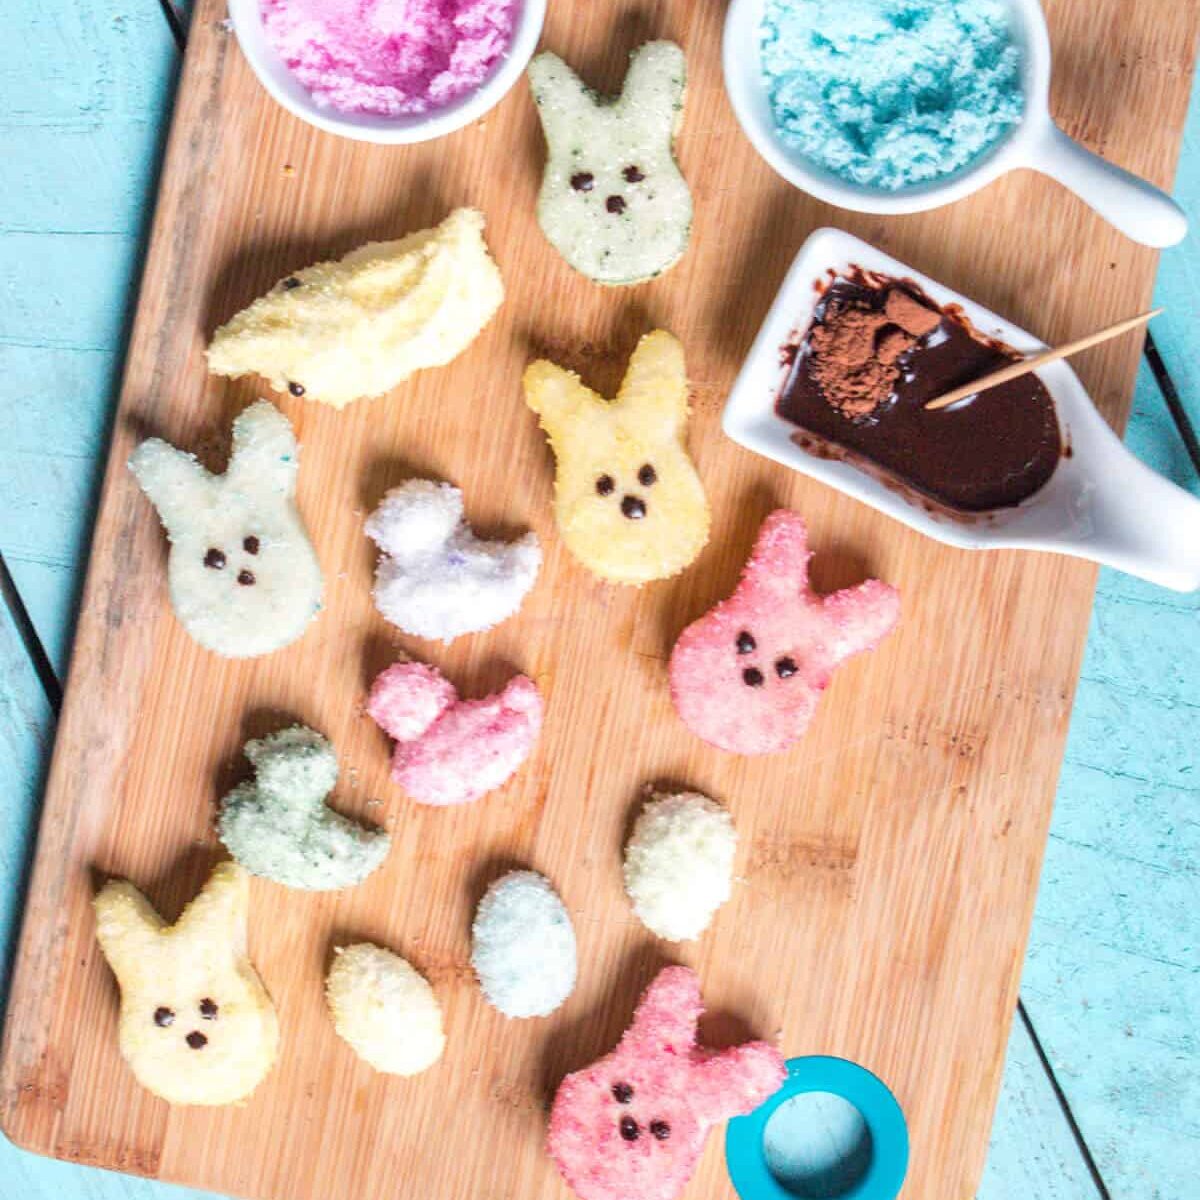 Overhead view of homemade marshmallow peeps covered with naturally colored sugar crystals on a bamboo cutting board.